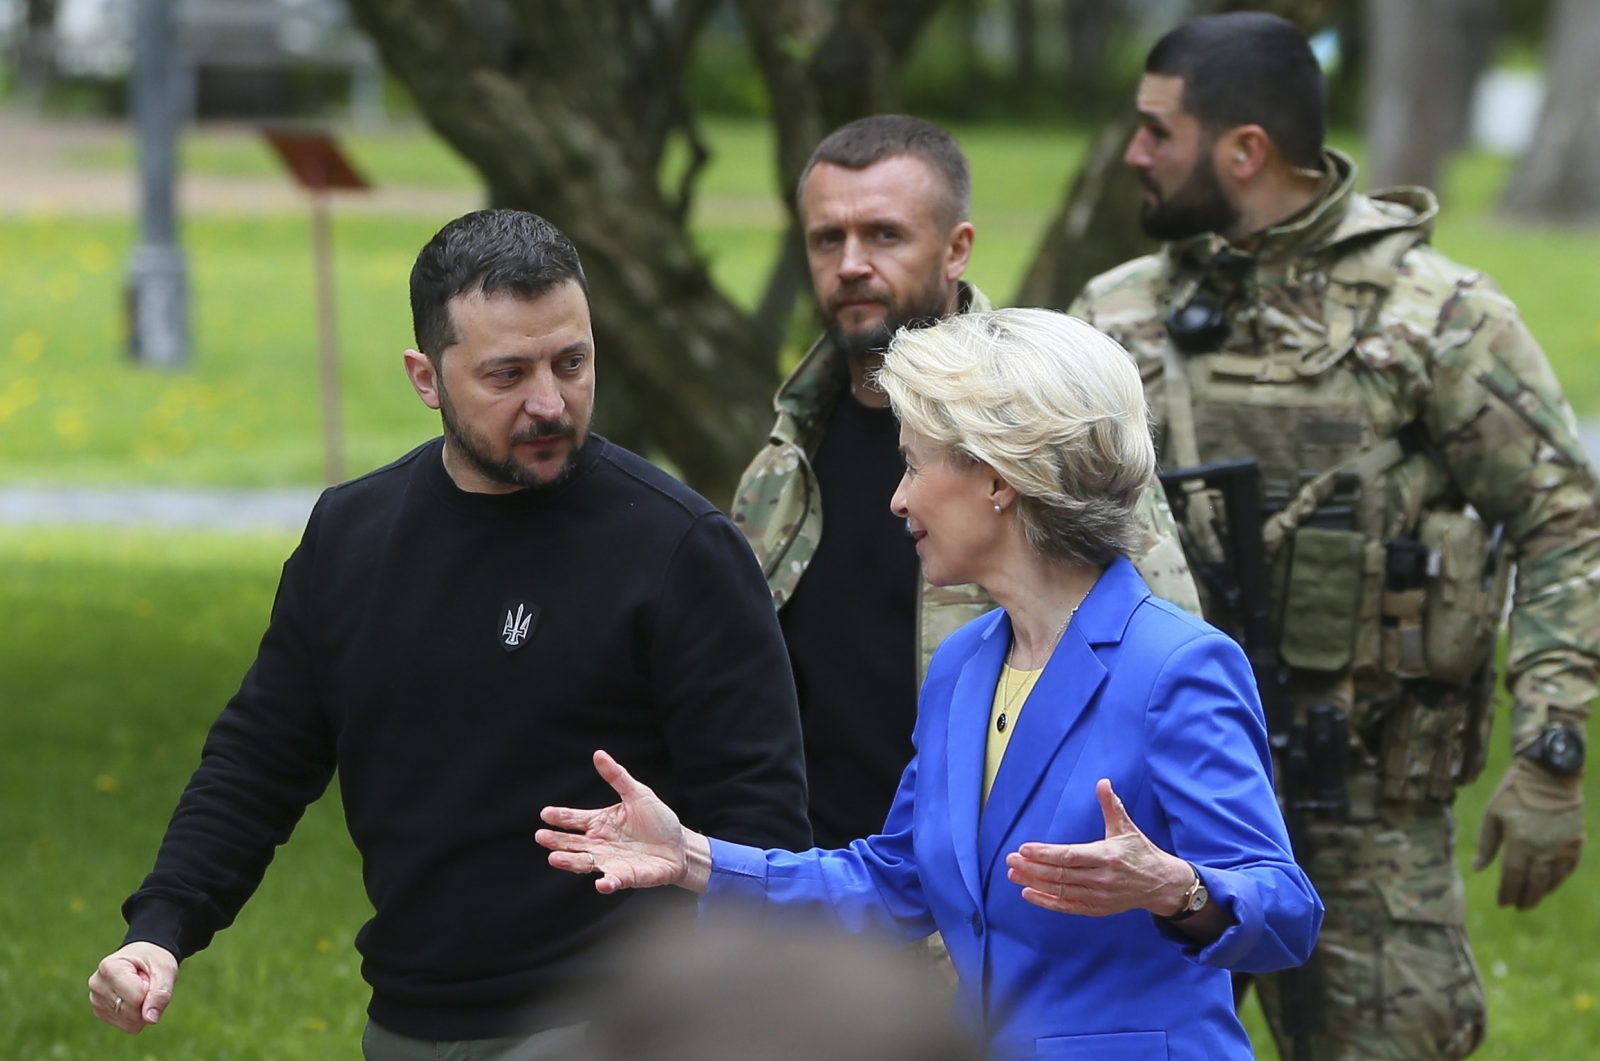 epa10617253 Ukraine's President Volodymyr Zelensky (L) and President of the European Commission Ursula von der Leyen (R) arrive for a joint meeting with the media near the St. Sophia Cathedral in Kyiv, Ukraine, 09 May 2023. Von der Leyen arrived in Kyiv to meet with top Ukrainian officials. President Zelensky announced that from now on May 09 will be annually celebrated as 'Europe Day' in Ukraine. Also on that day, some countries mark the 78th anniversary of Victory Day, the unconditional surrender of Nazi Germany on 08 May 1945, and the Allied Forces' victory, which marked the end of World War II in Europe.  EPA/STEPAN FRANKO